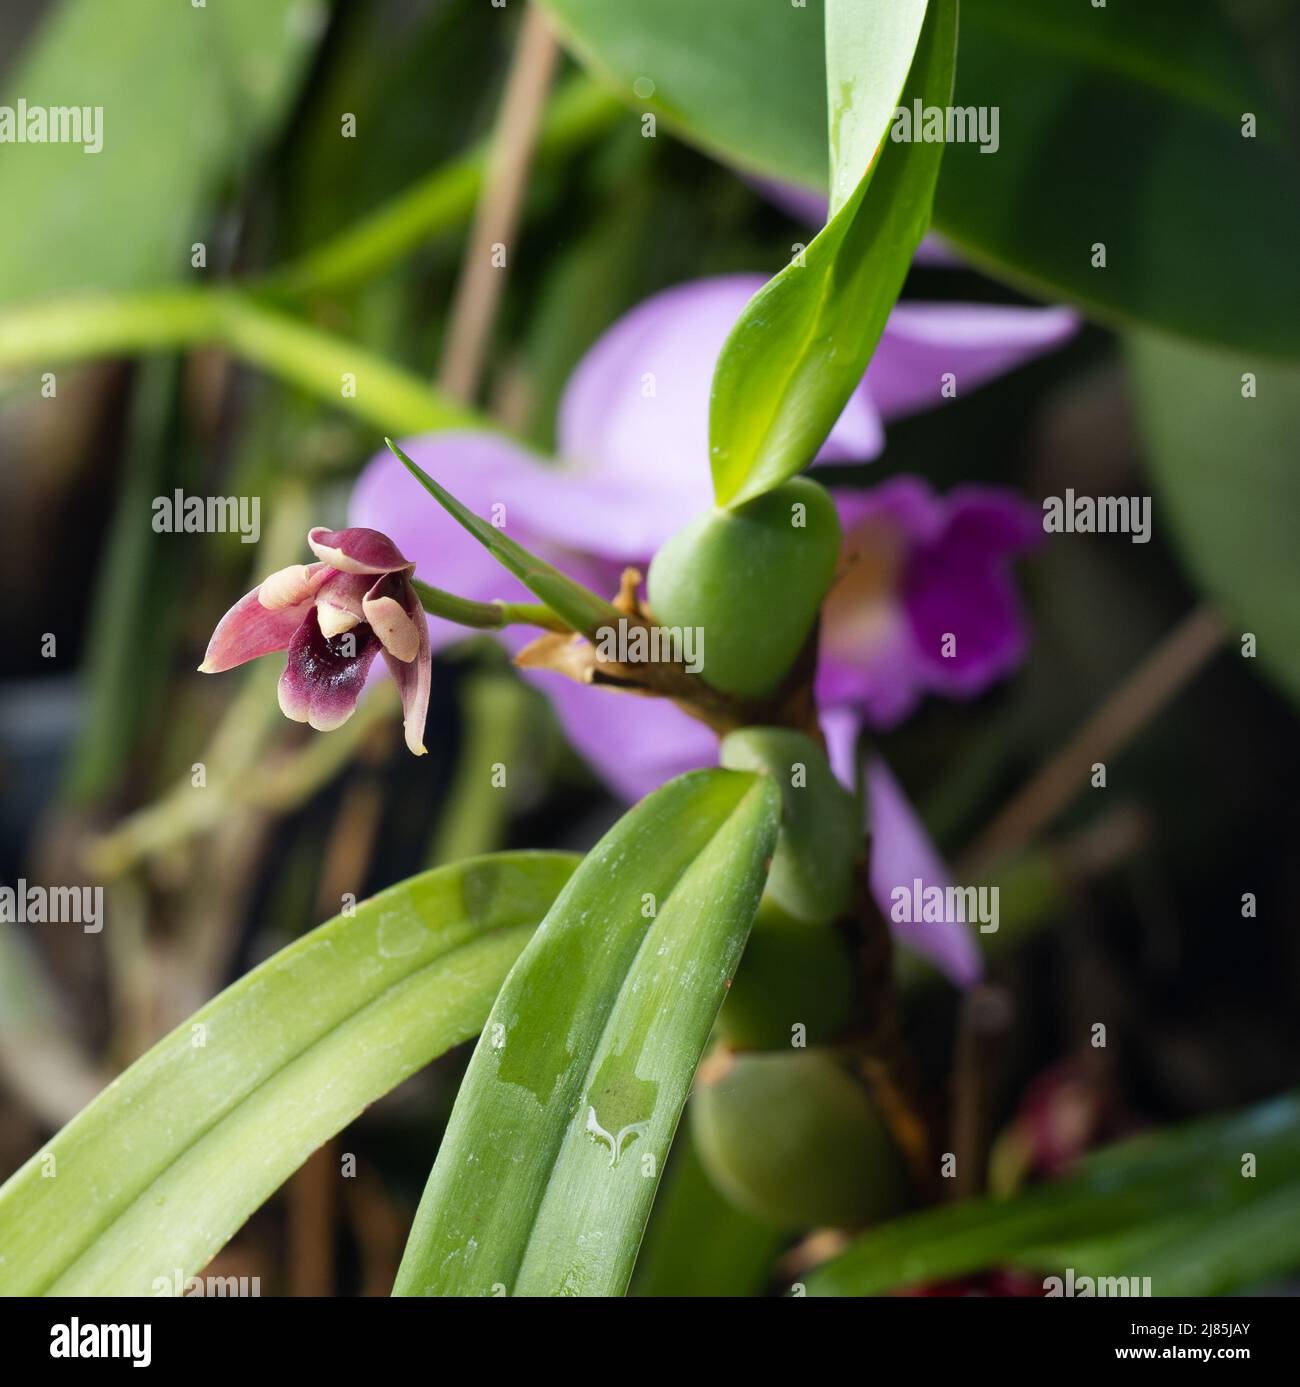 Mini orchid pink, purple yellow. Dwarf small size. Orchids flower bud. Rare variety spotted multi-colored. Stock Photo